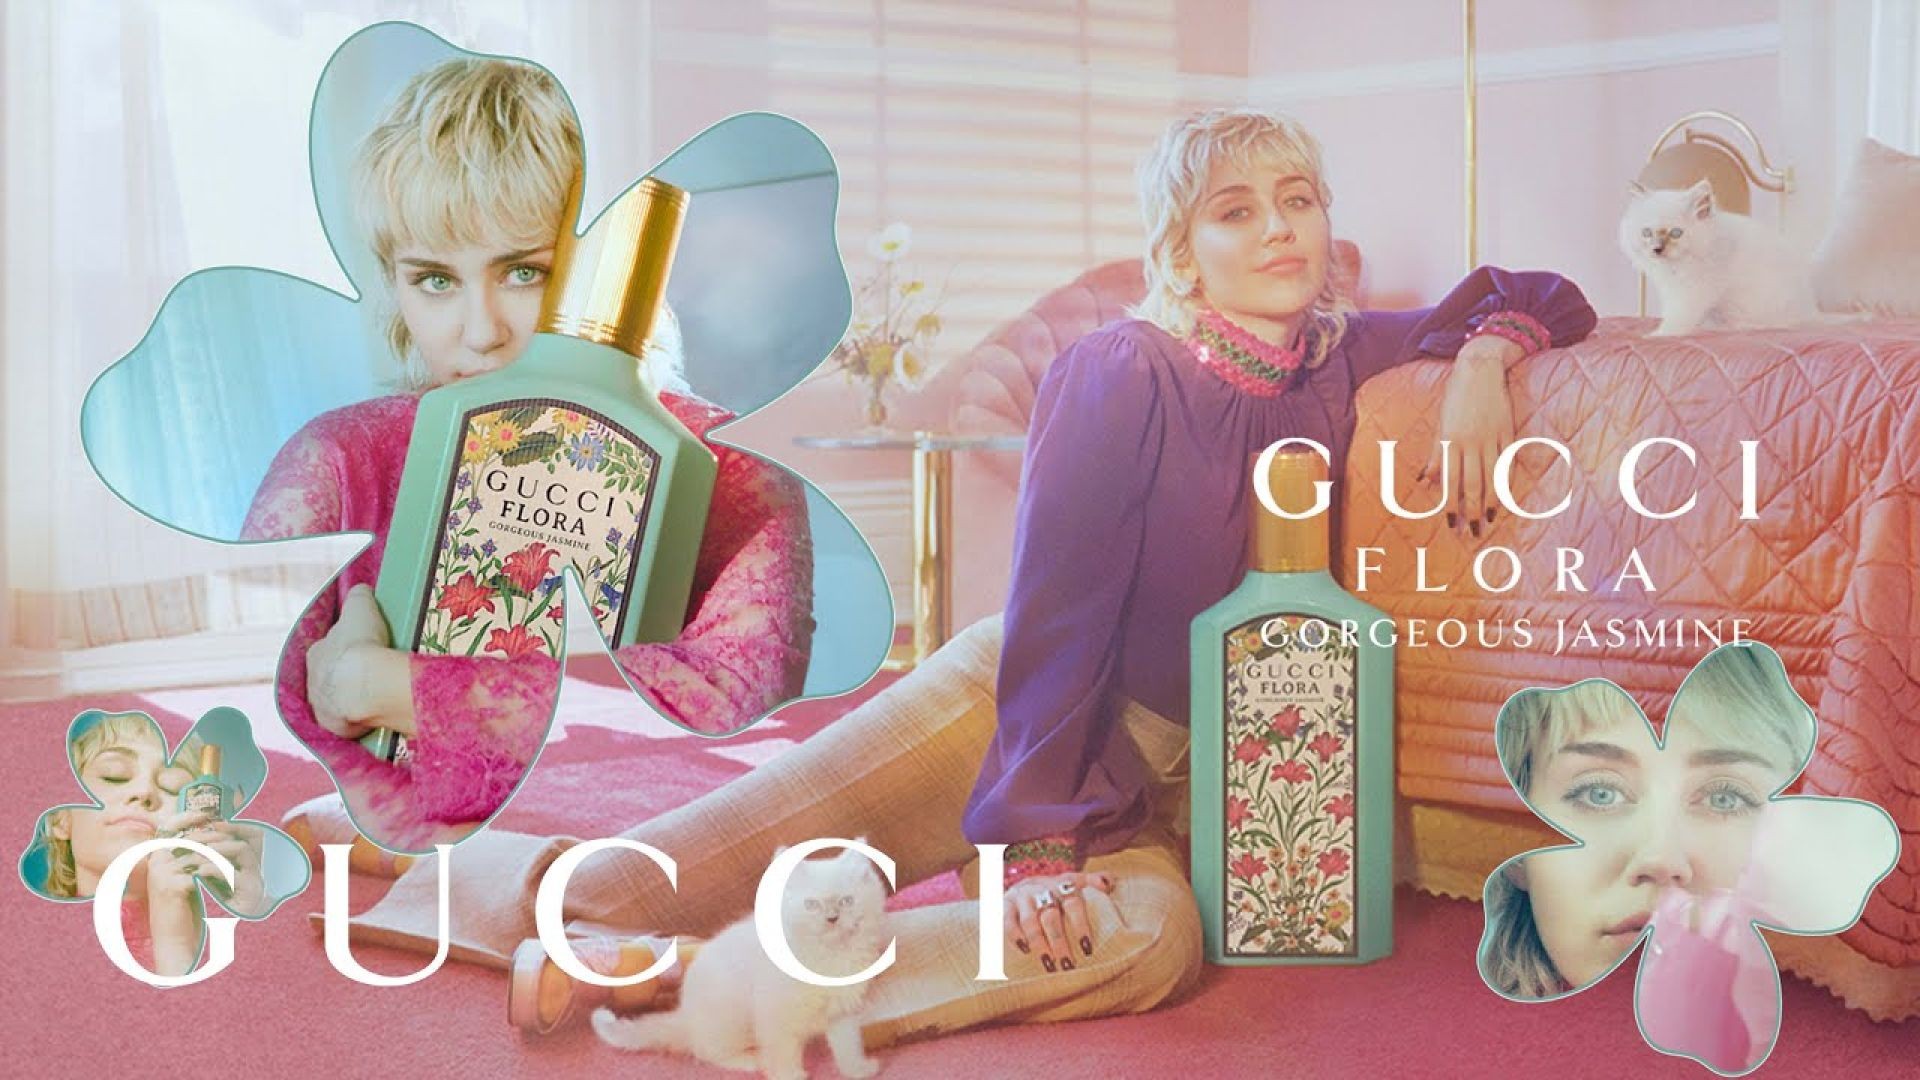 Miley Cyrus for Gucci Flora